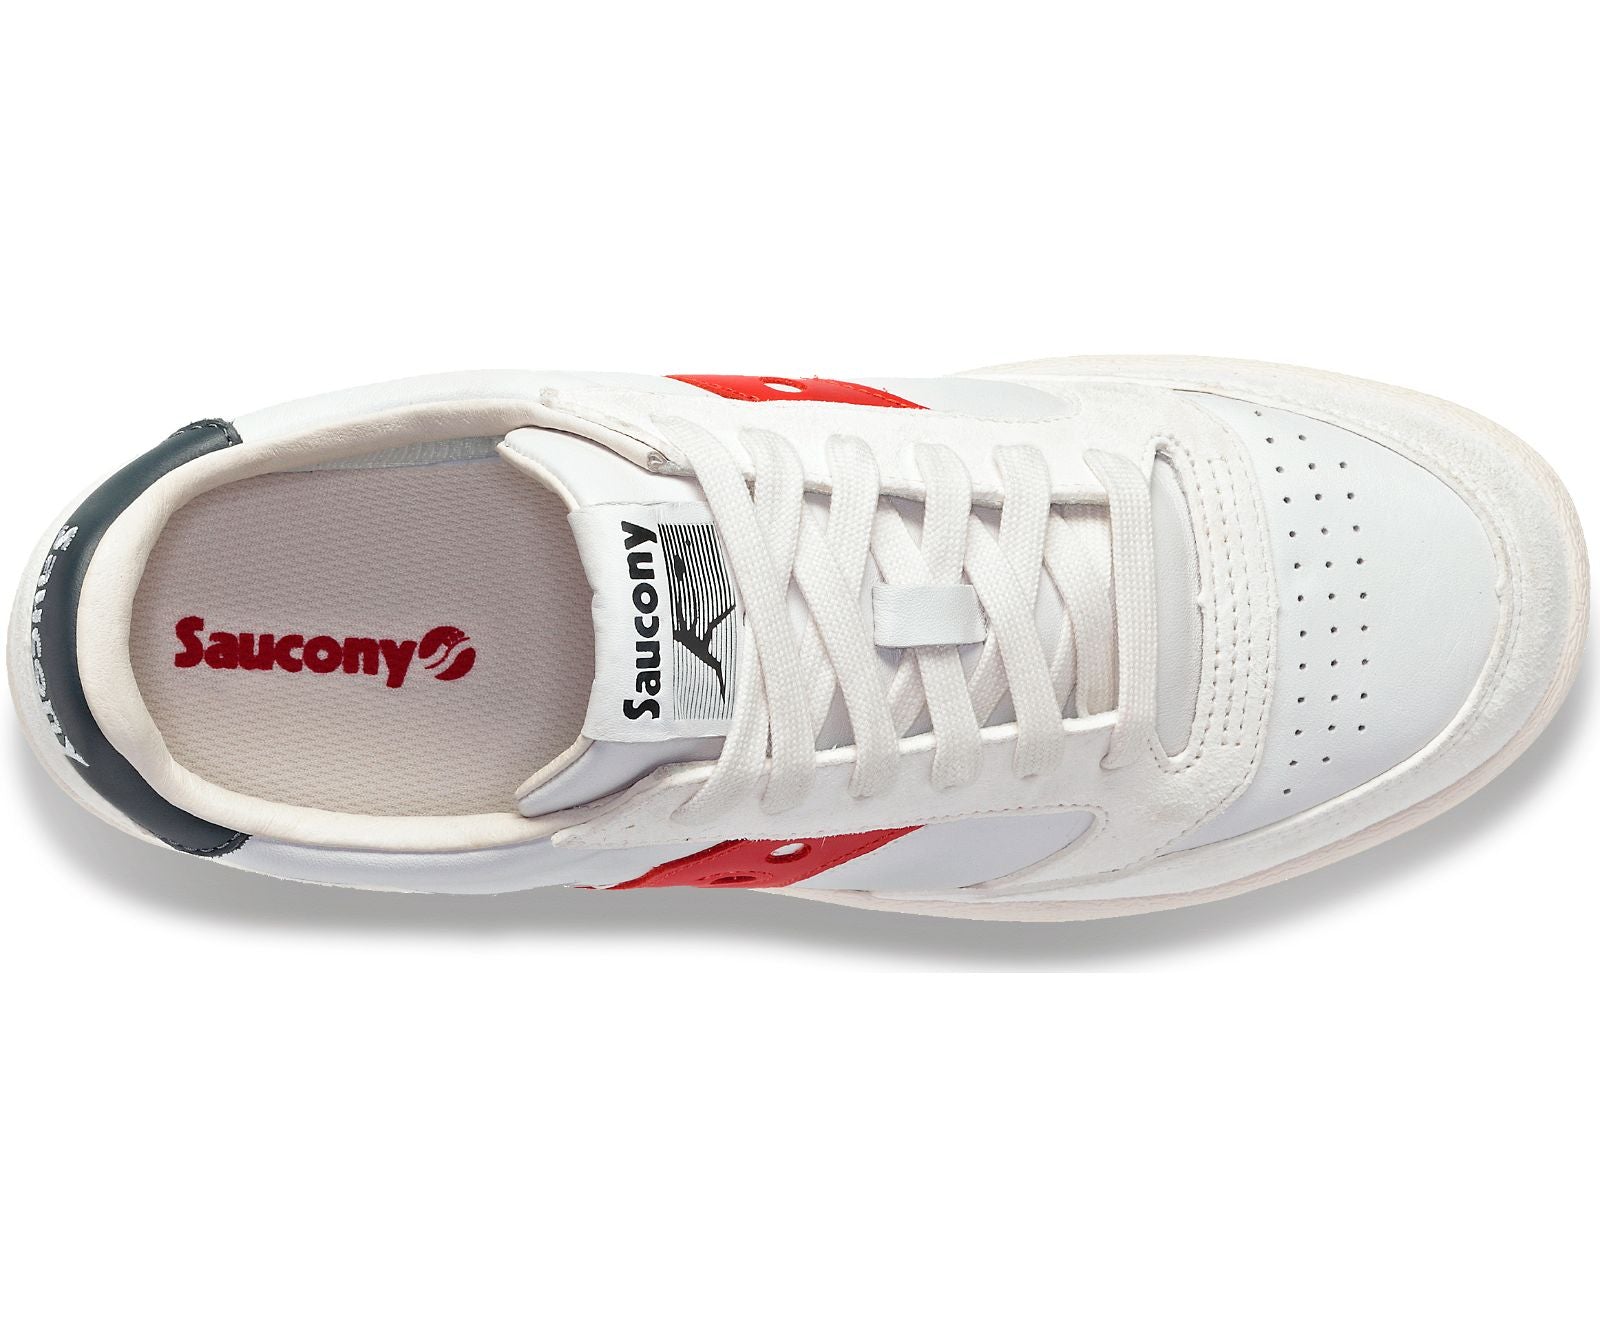 Top view of the Saucony Jazz Court Premium sneaker in White/Red